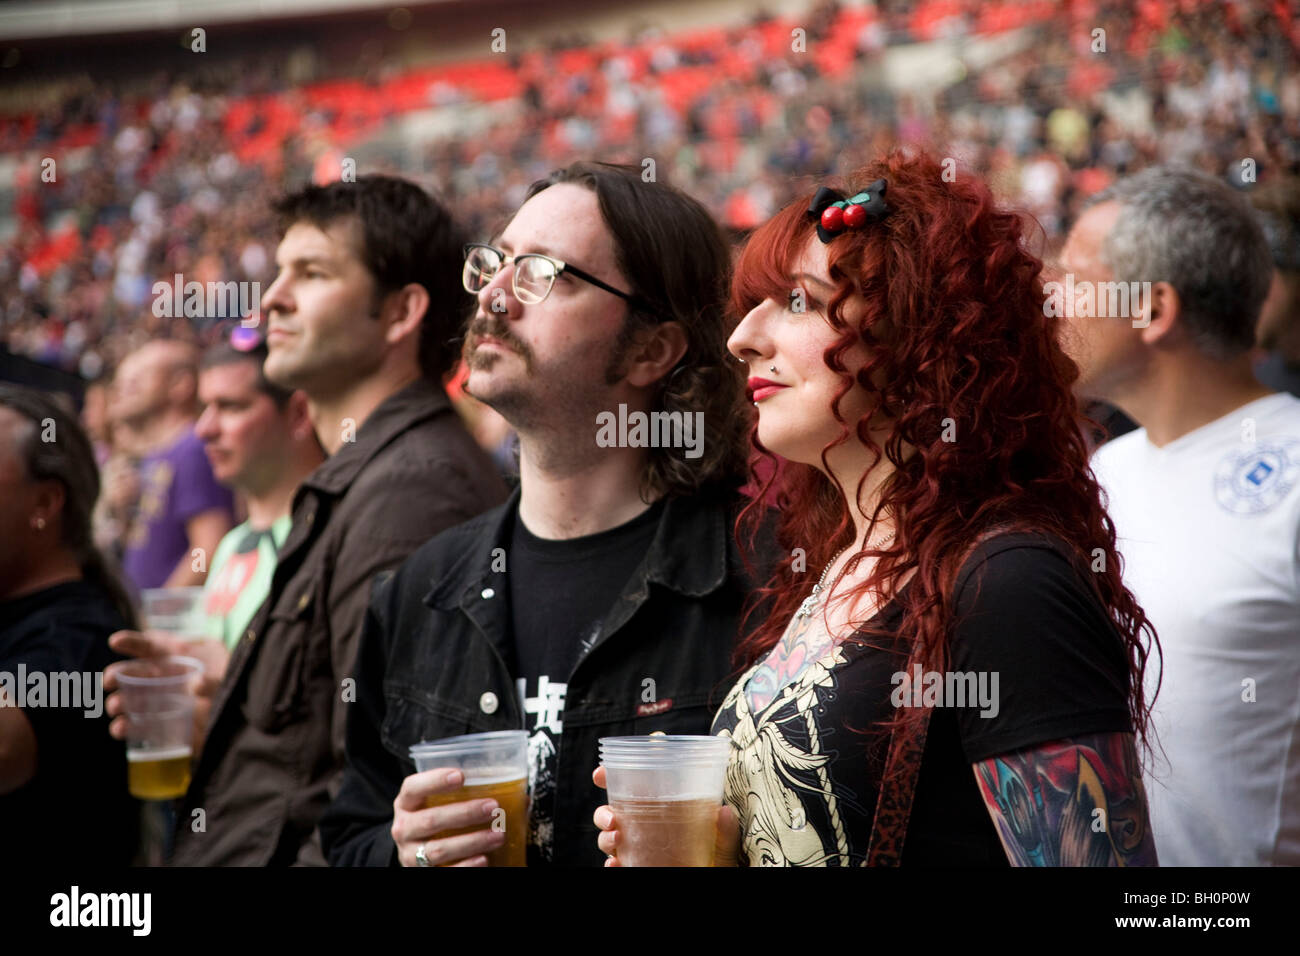 Tattooed female fan with bearded partner watching concert and drinking beer, AC/DC at Wembley Stadium, June 2009 Stock Photo